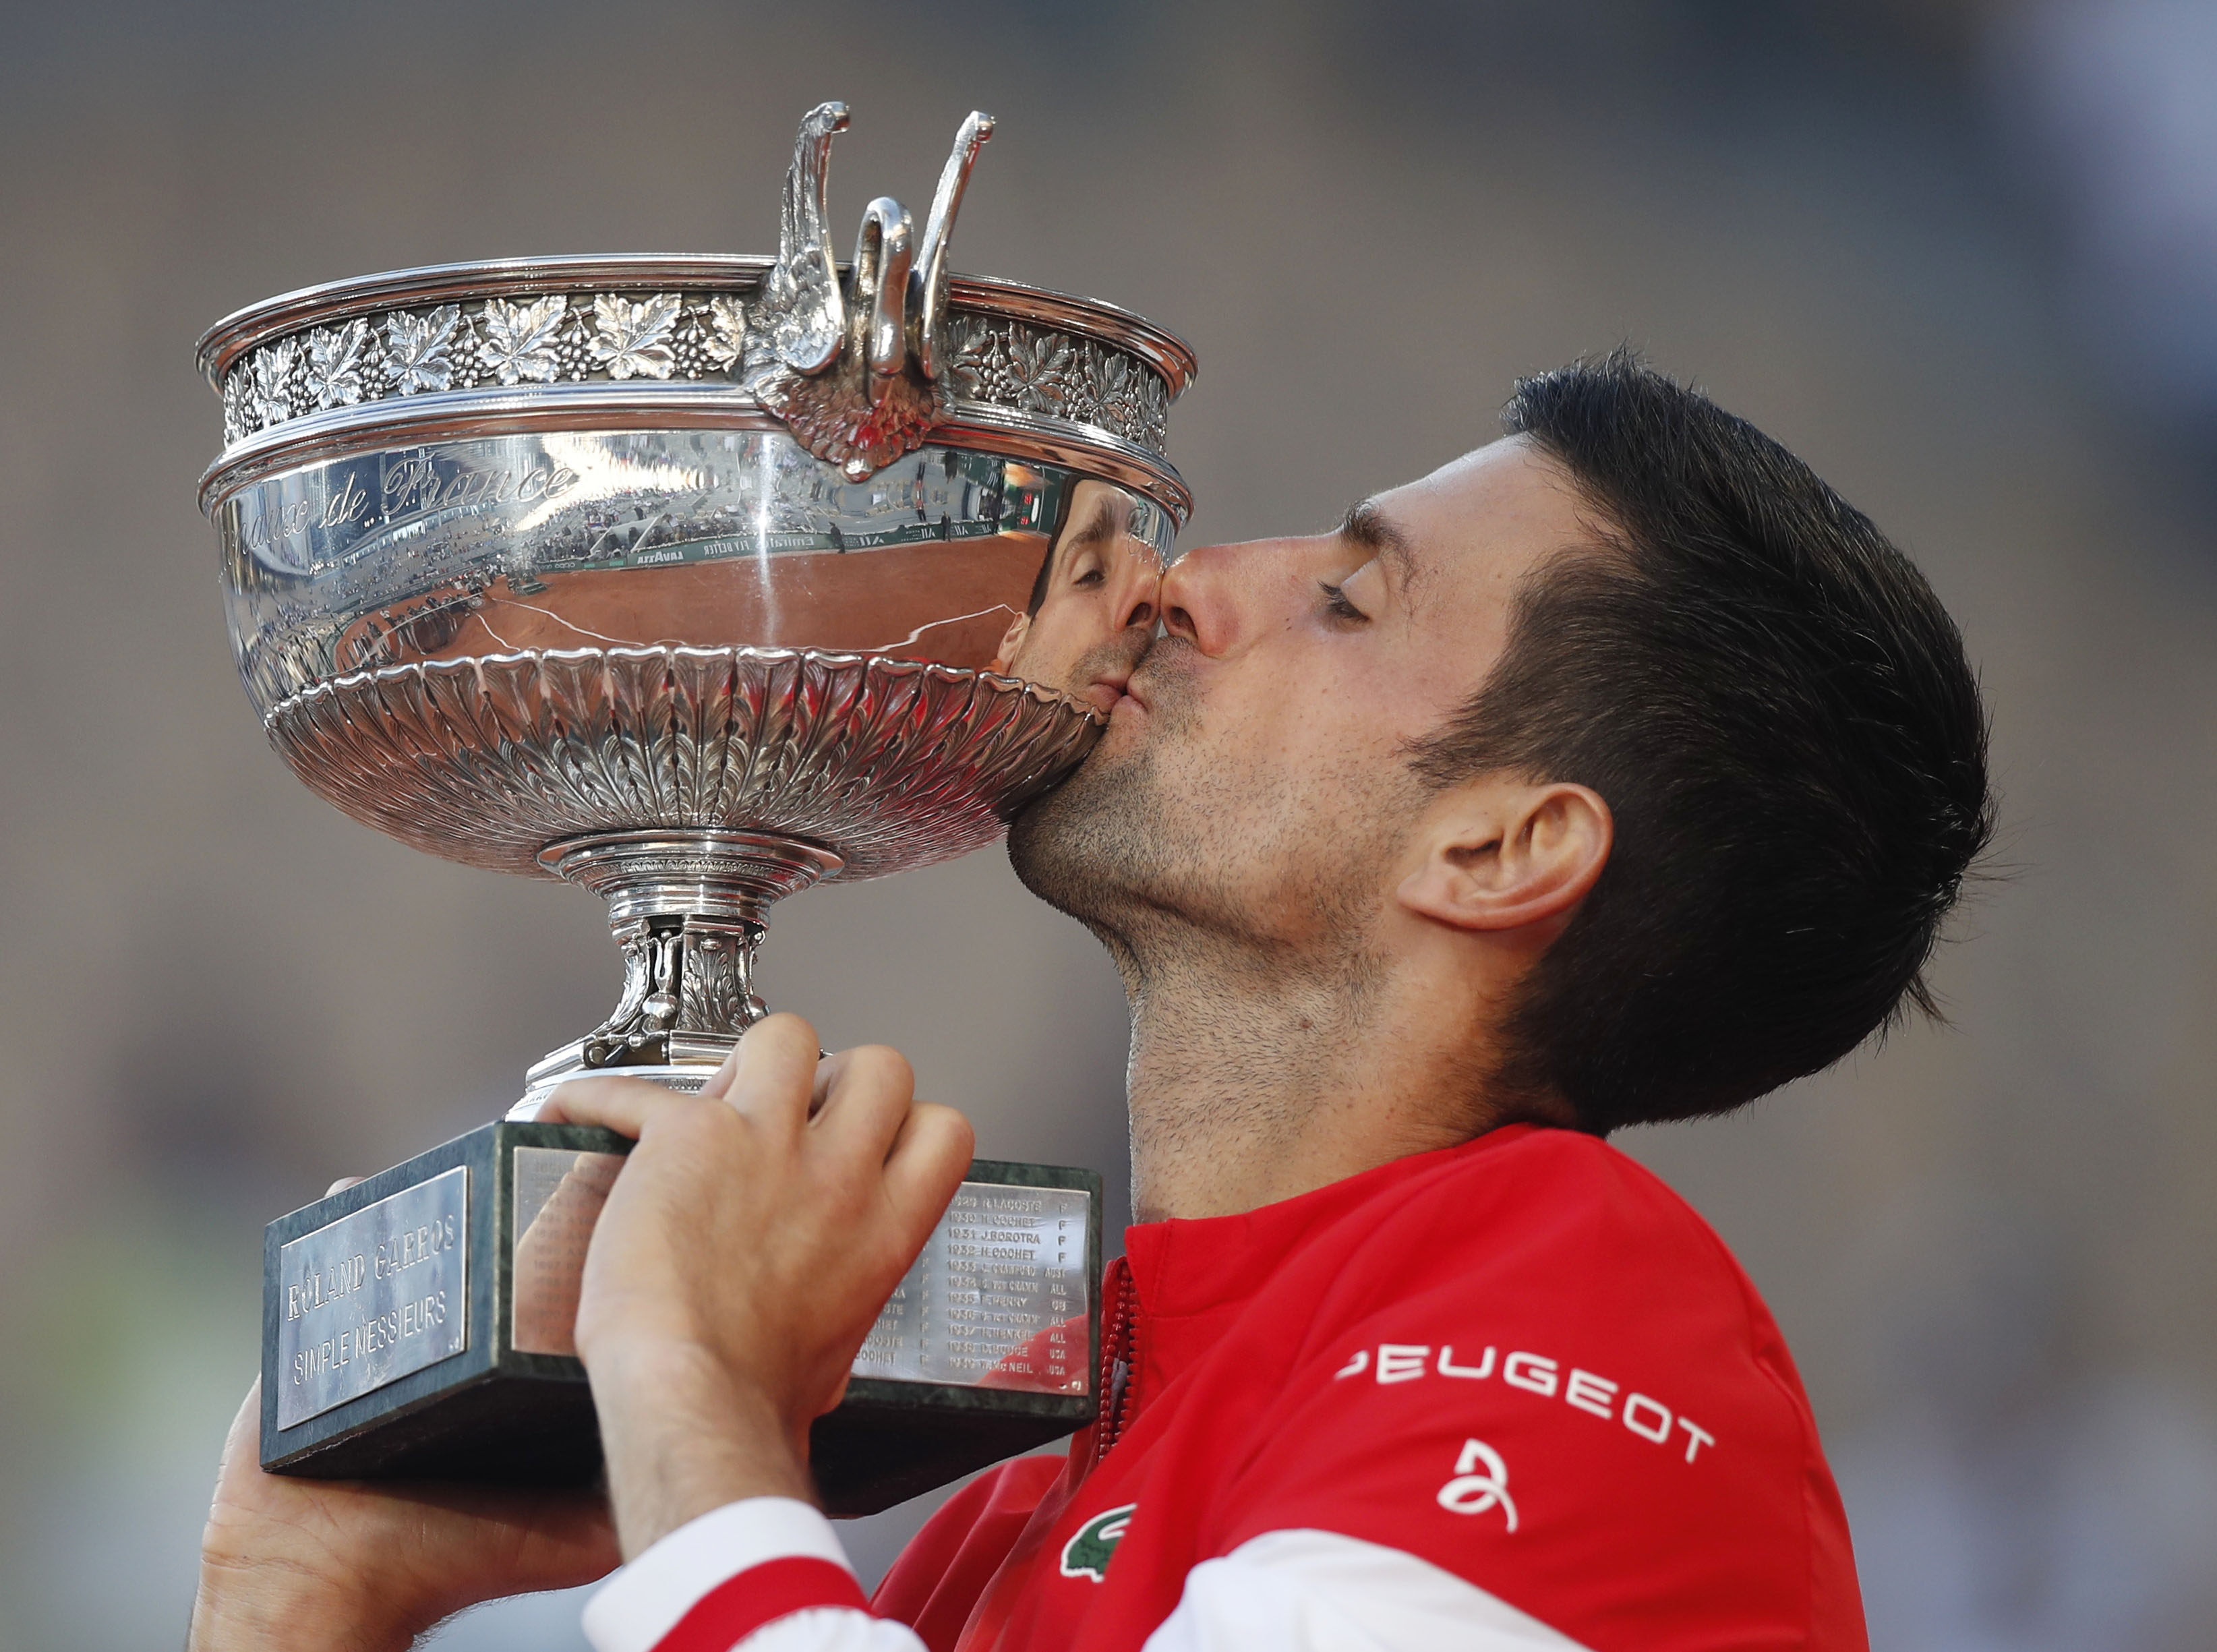 Serbia’s Novak Djokovic celebrates with his trophy after winning the French Open against Greece’s Stefanos Tsitsipas at Roland Garros stadium in Paris, France on Sunday. Photo: Reuters